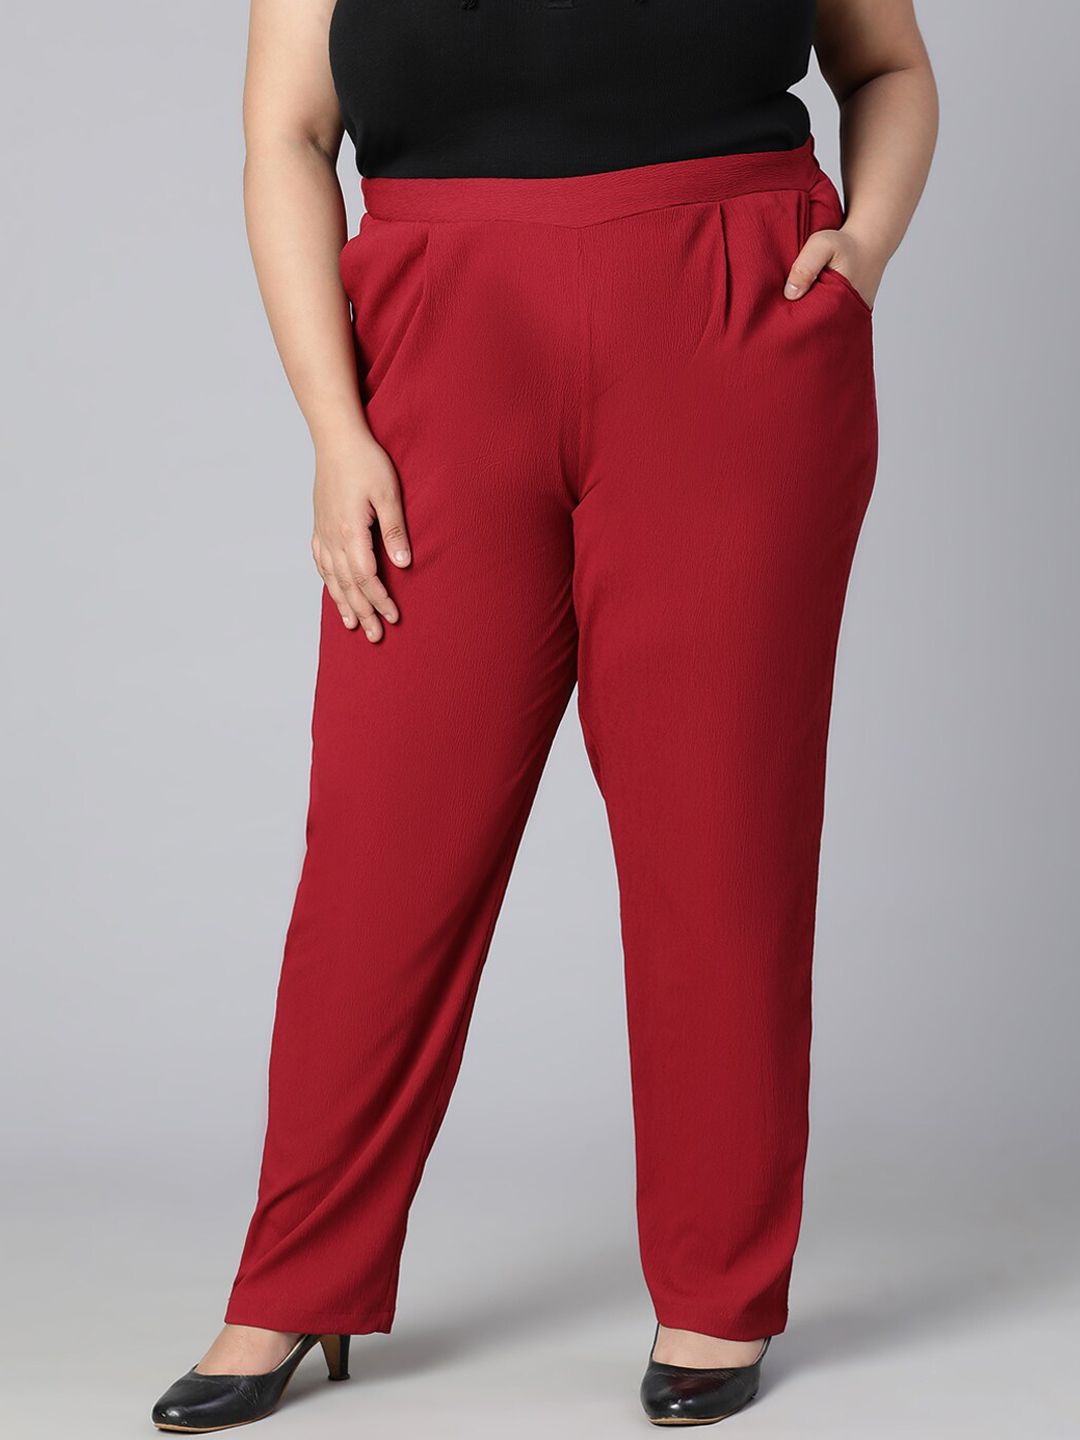 Oxolloxo Women Maroon Trousers Price in India